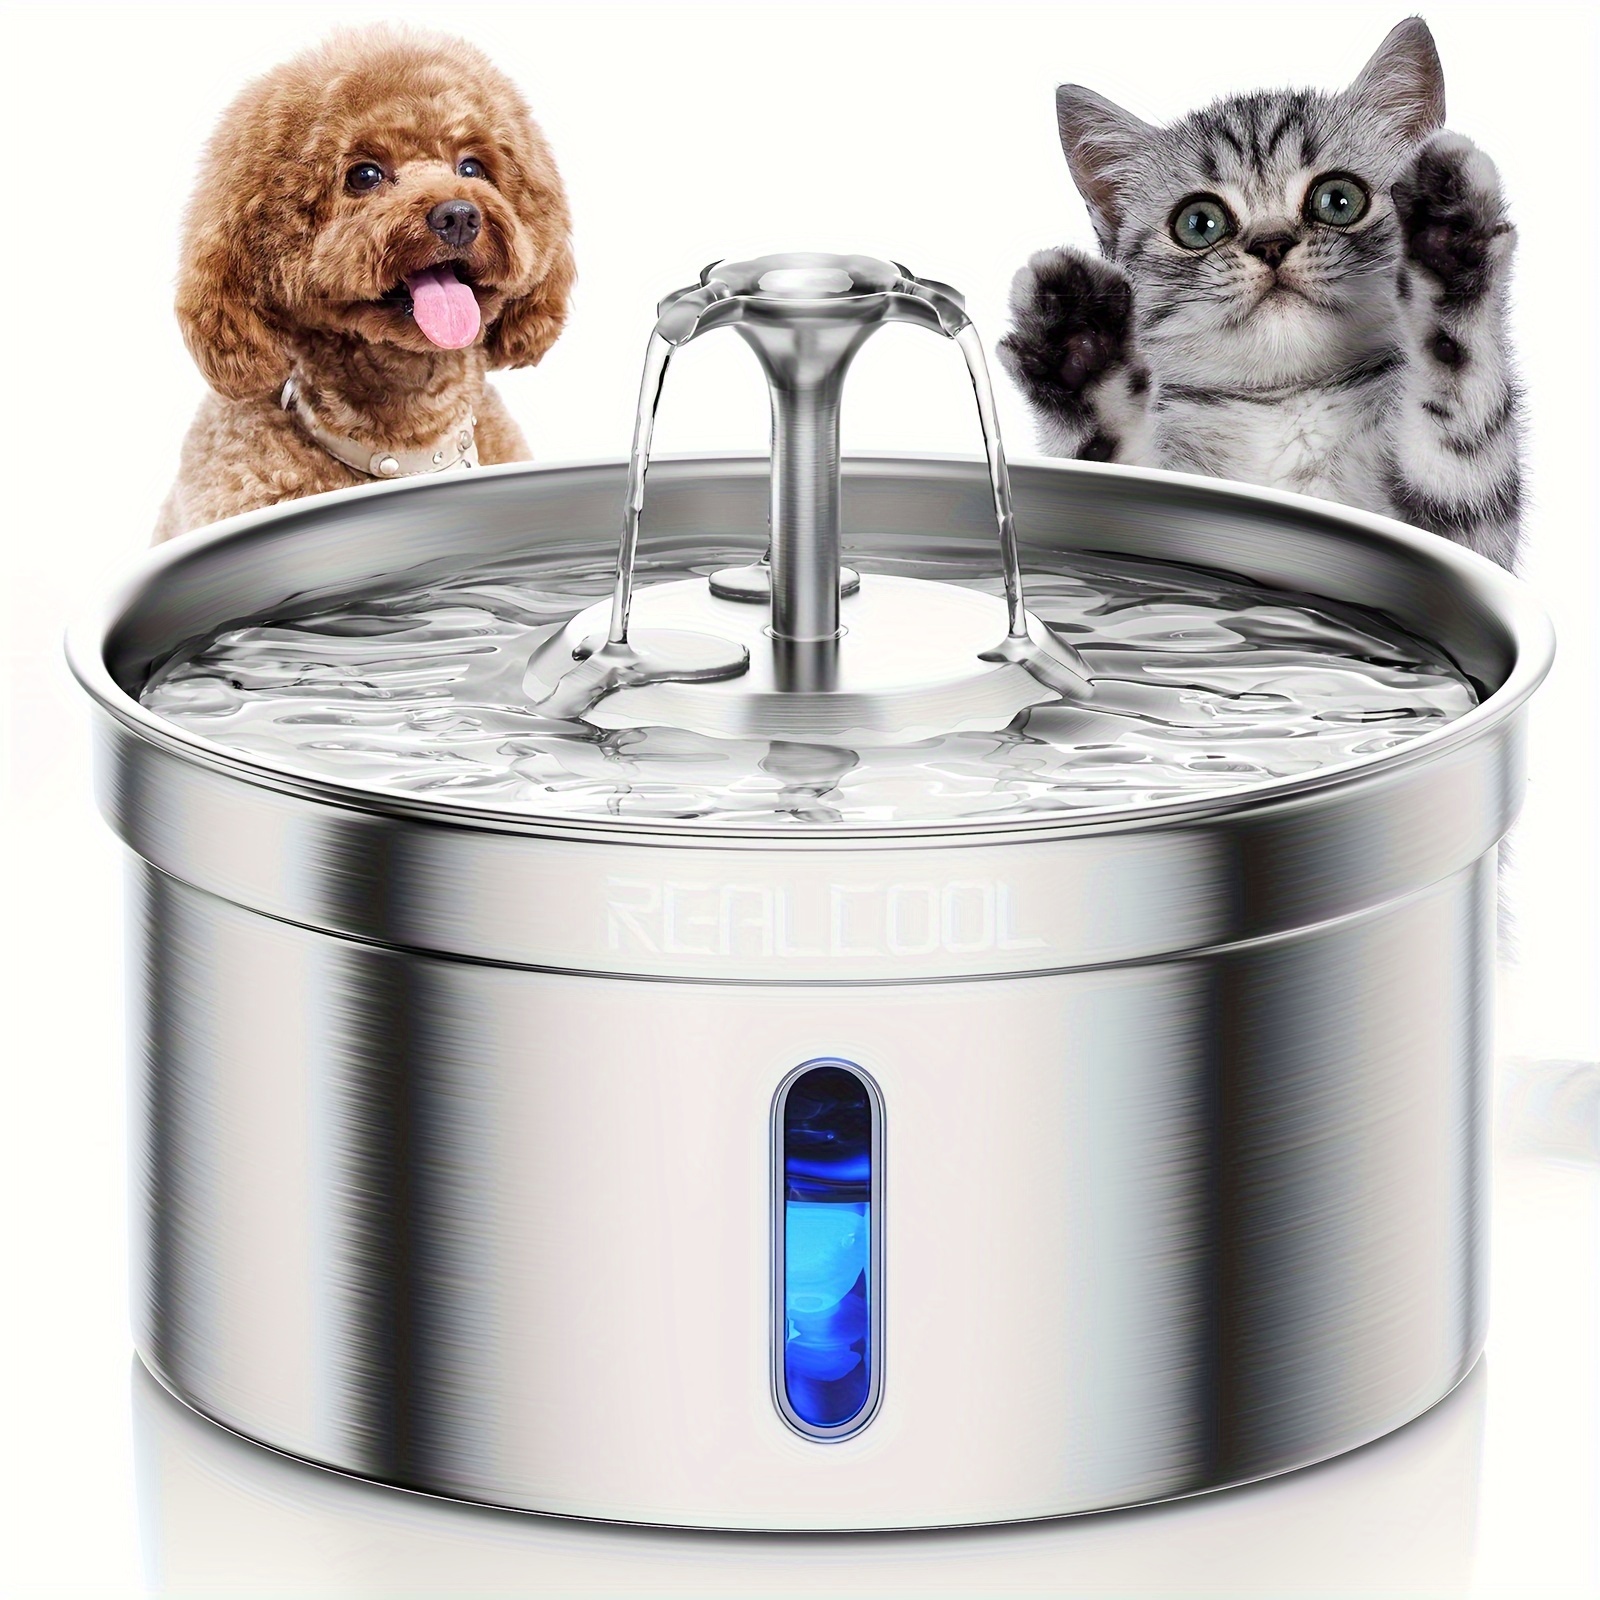 

Cat Water Fountain Stainless Steel 3.8l/130oz, Large Capacity Pet Water Fountain For Cats Inside, Automatic Dog Water Dispenser With Quiet Pump, Suitable For Multi-pet Households